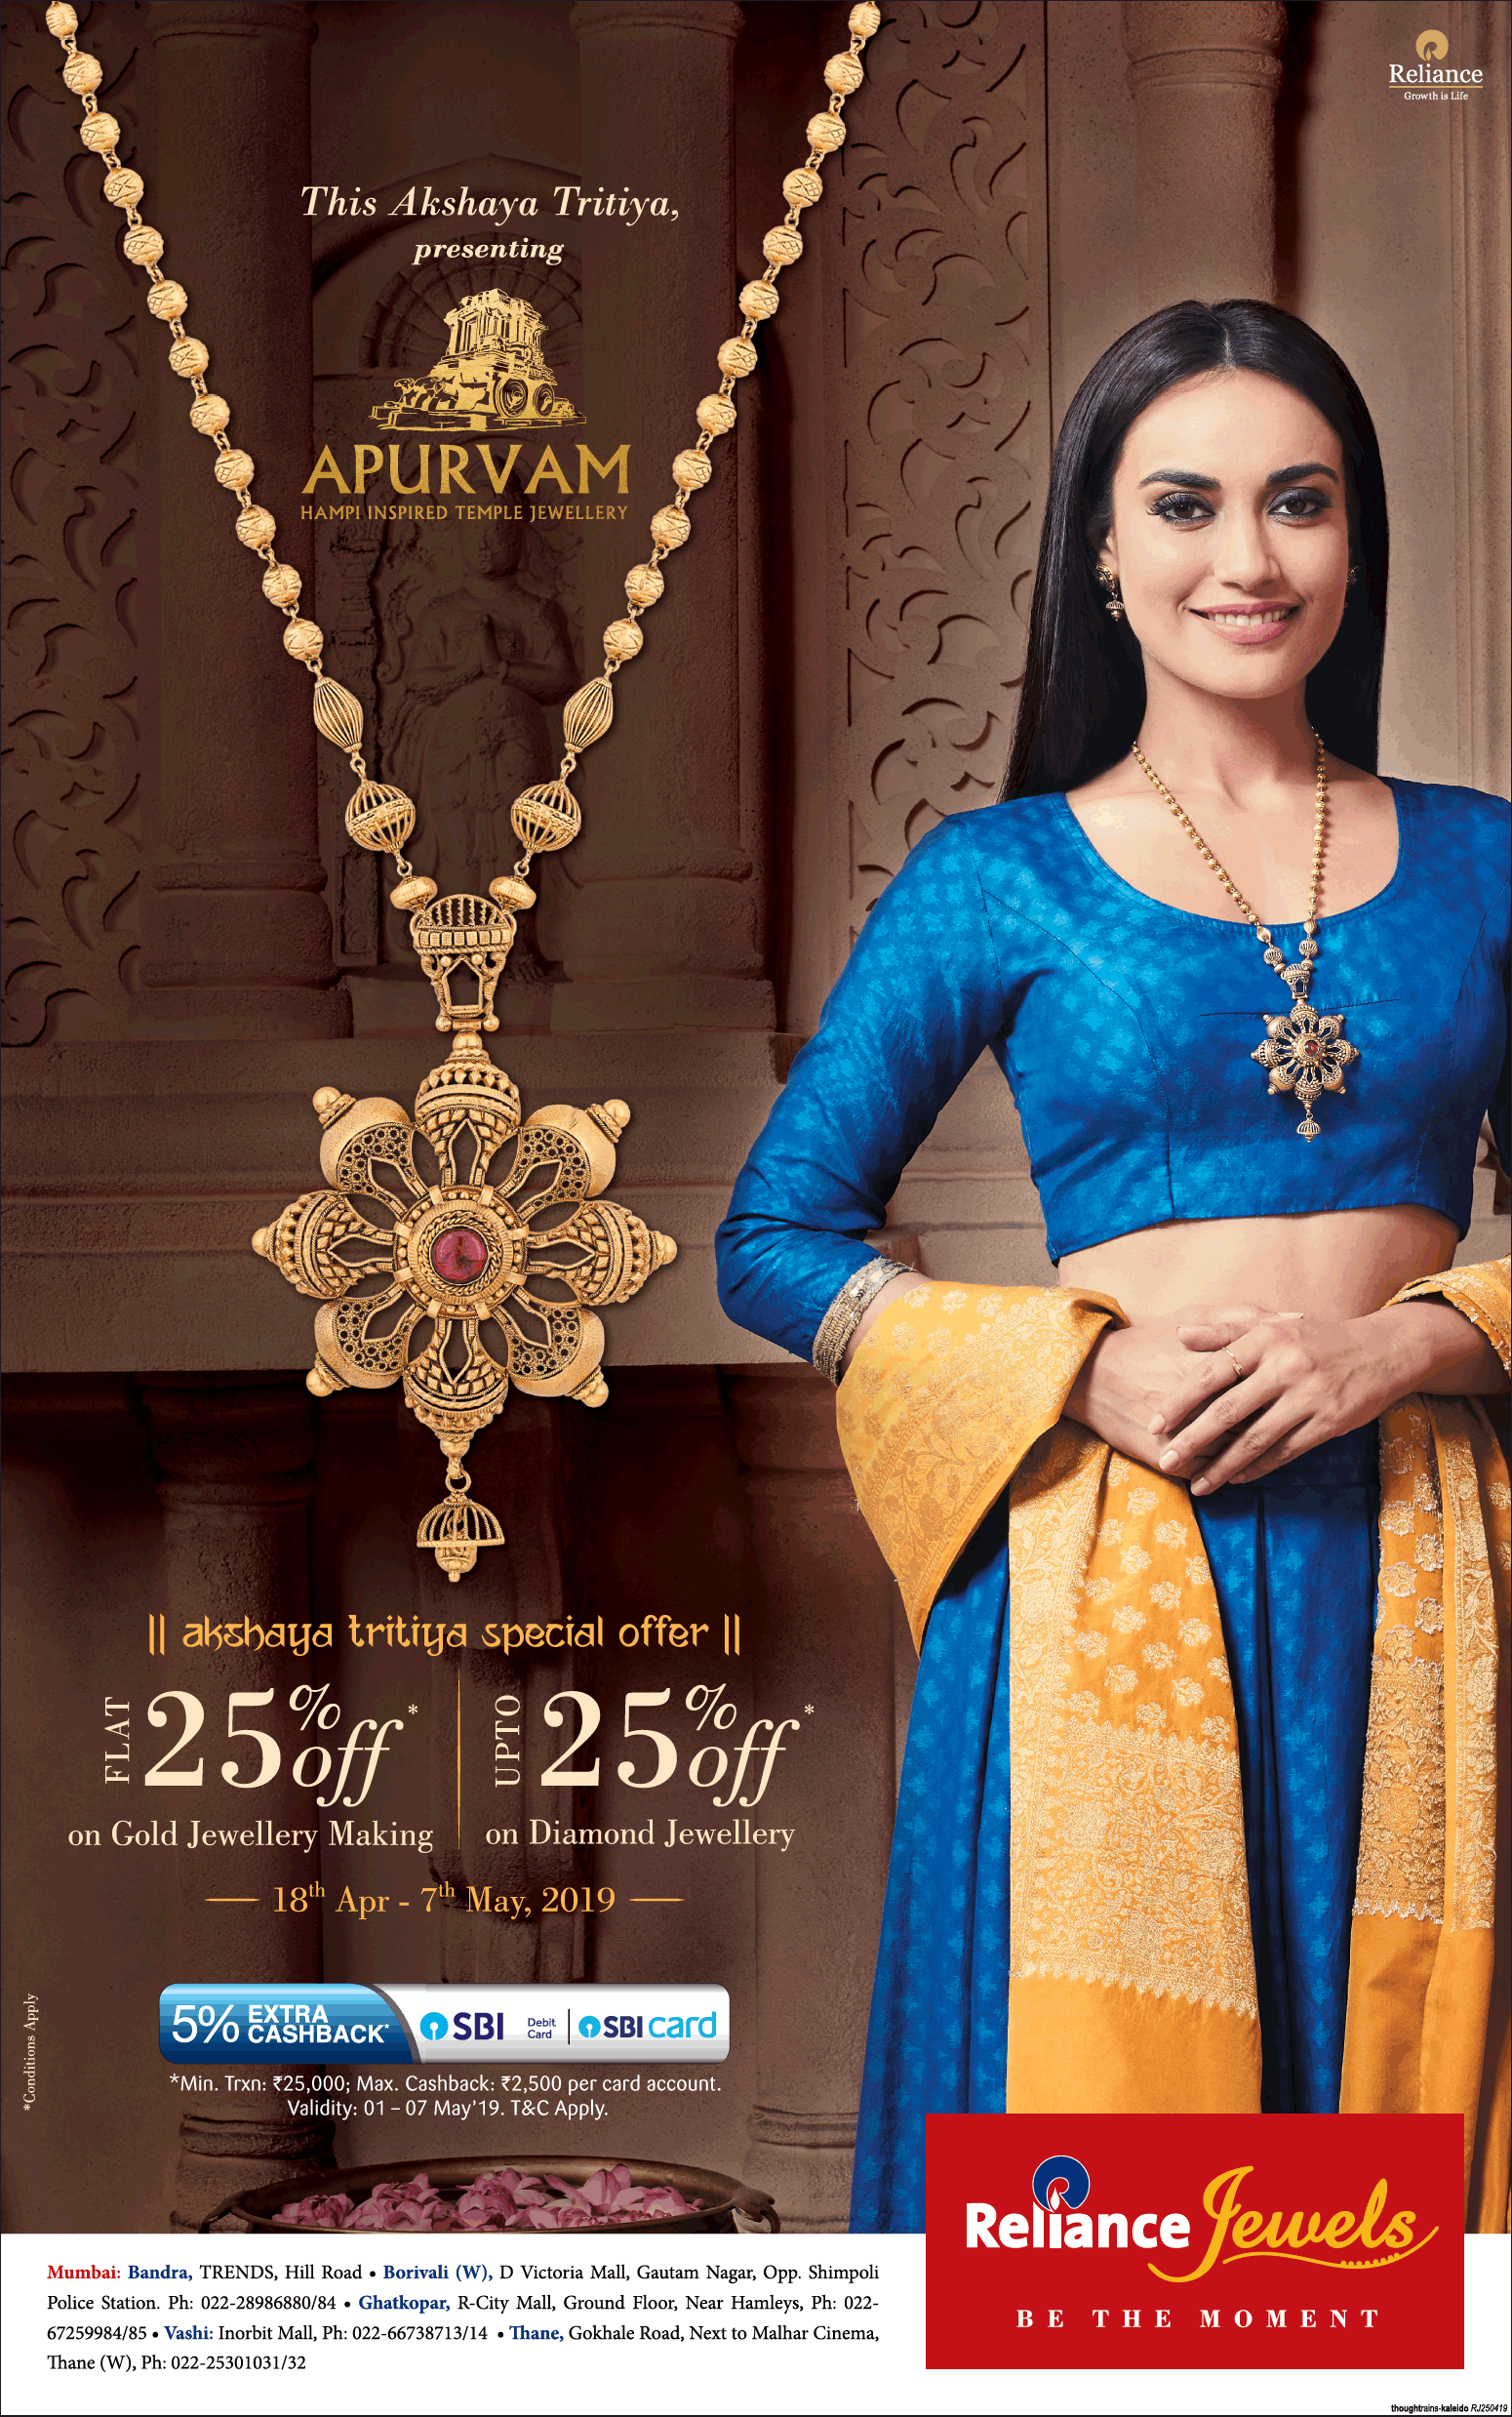 relaince-jewels-akchaya-tritiya-special-offer-ad-bombay-times-03-05-2019.png